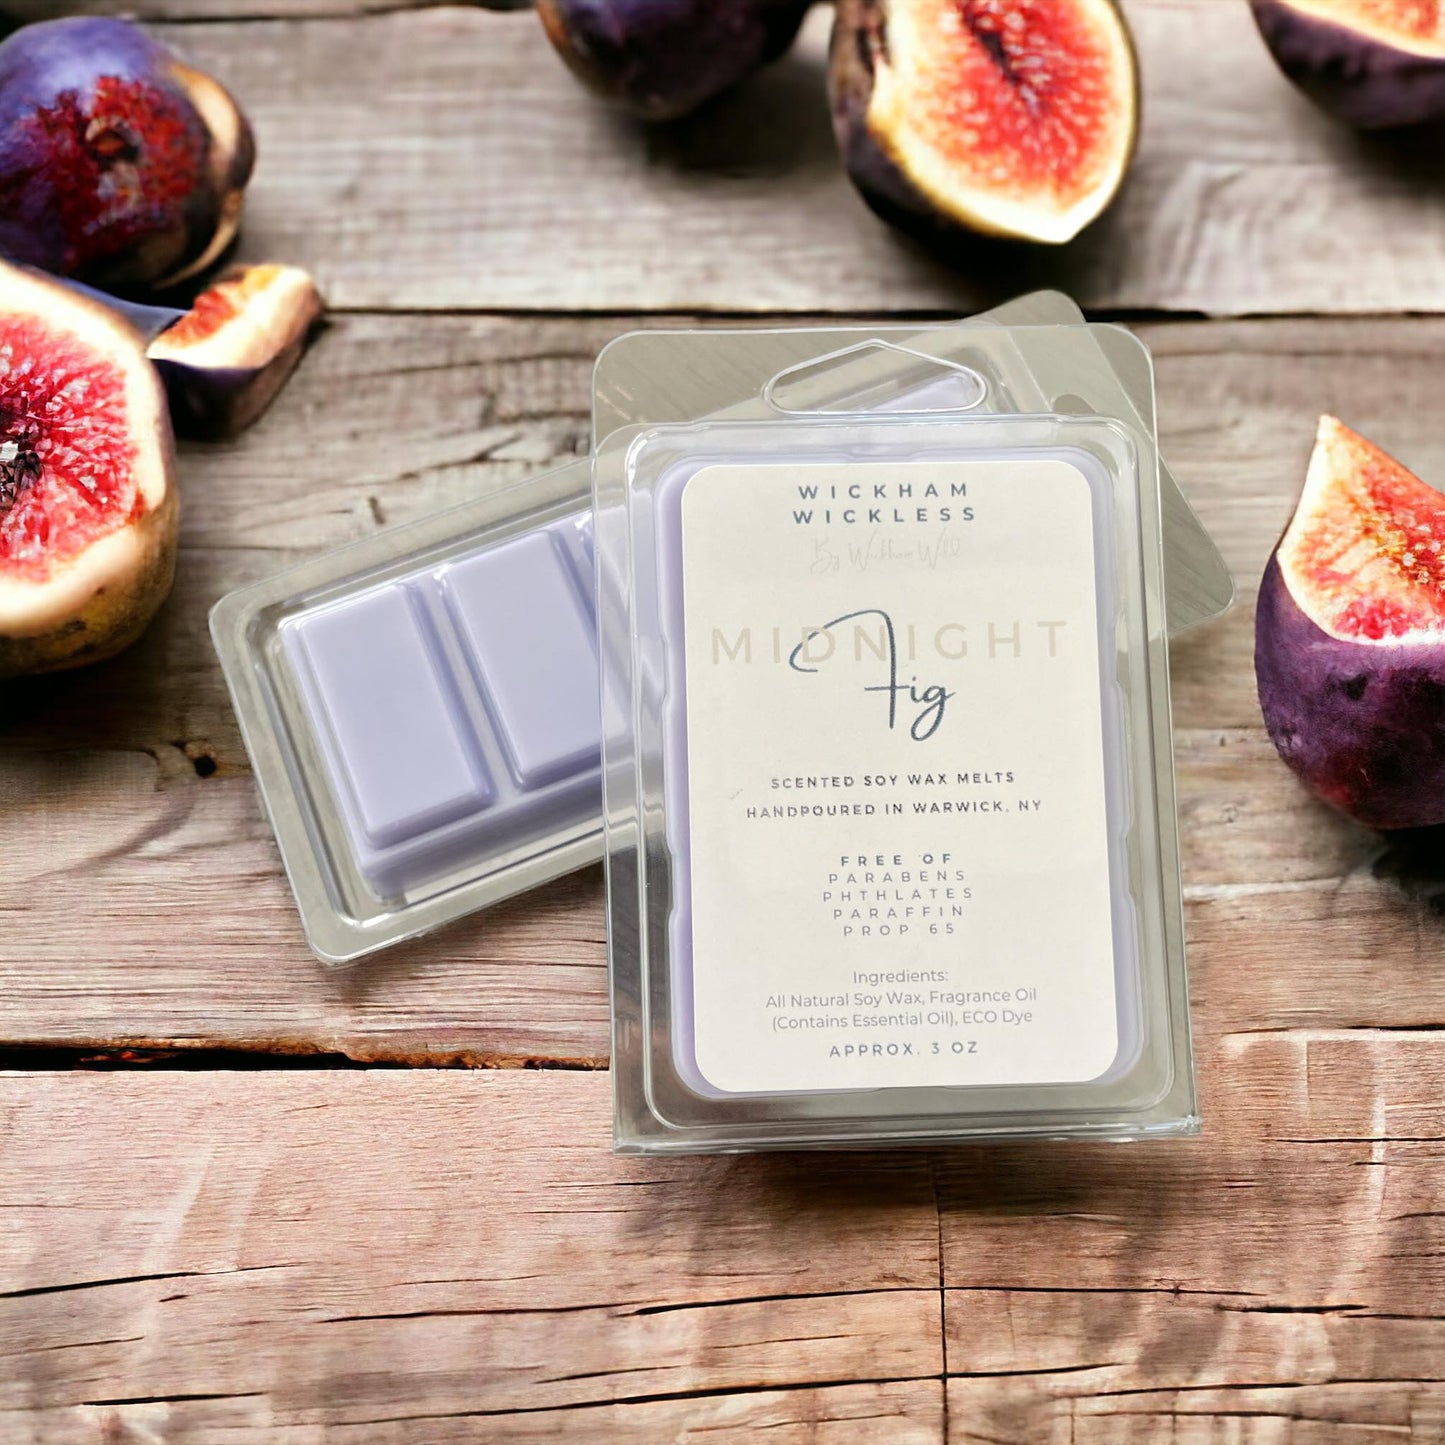 Handpoured Wax Melts: Midnight Fig